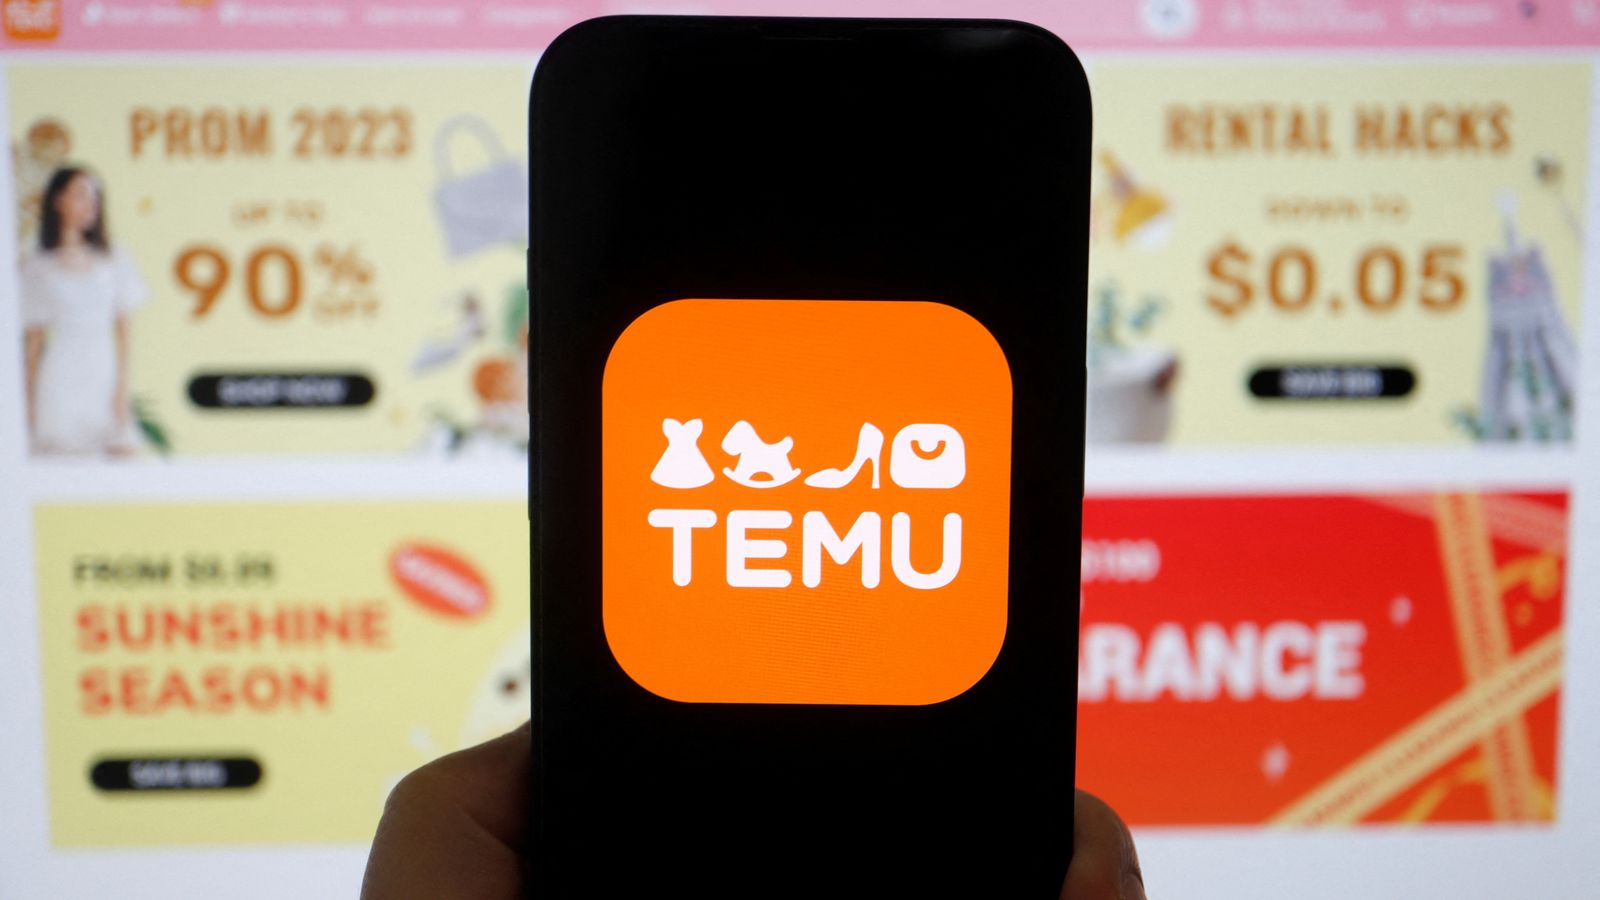 Weapons being sold on shopping app Temu with no age checks, consumer group Which? finds